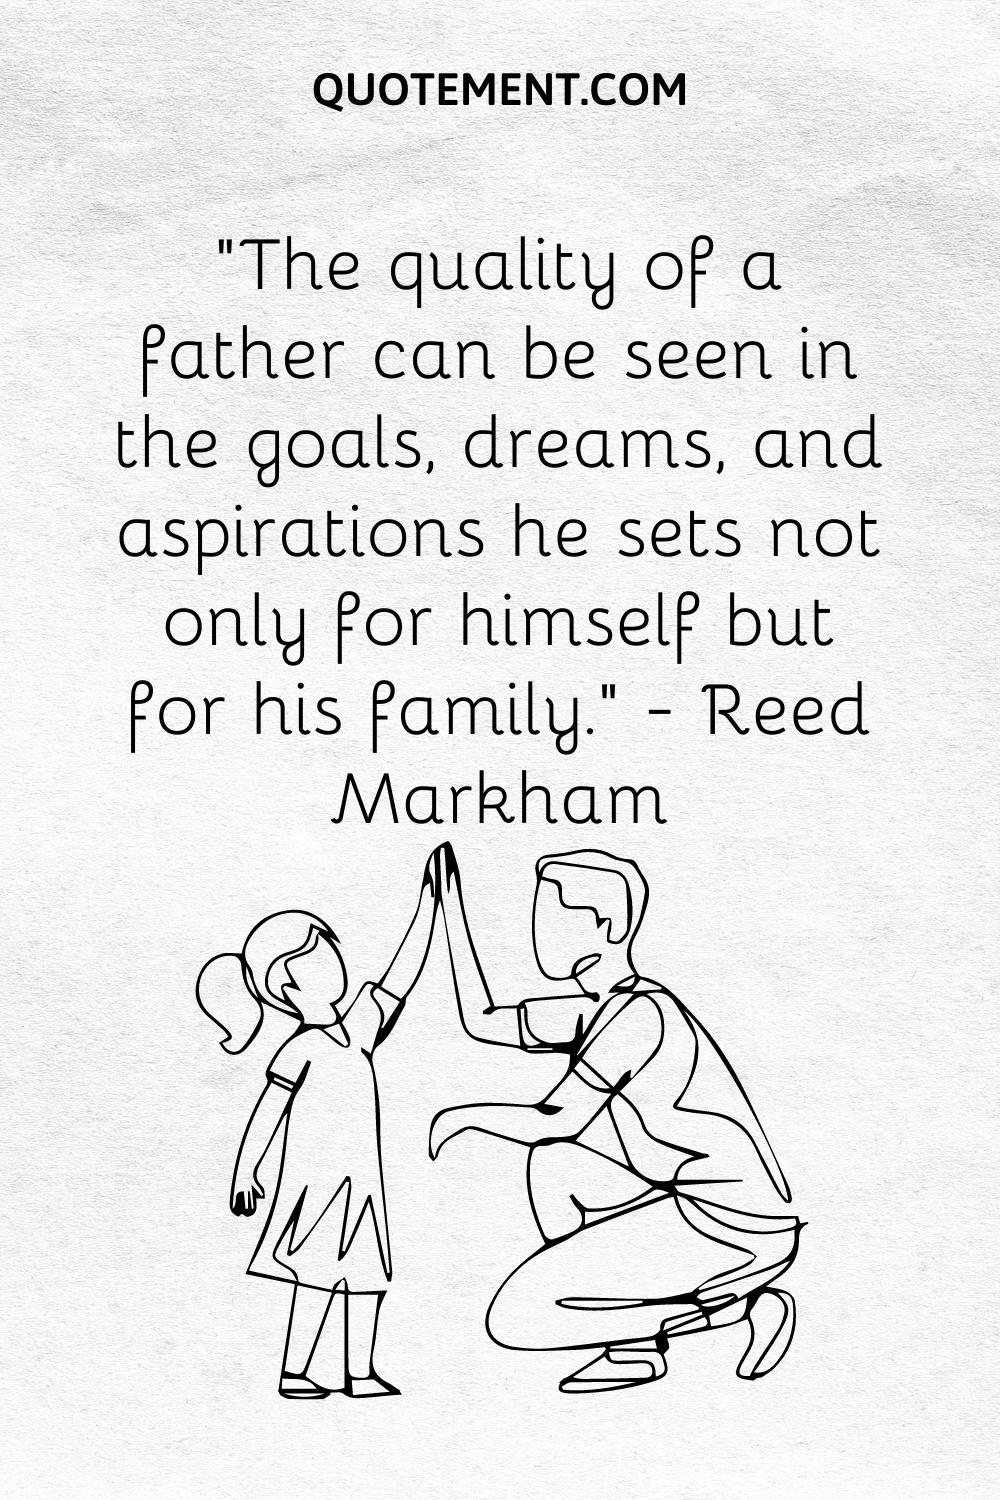 The quality of a father can be seen in the goals, dreams, and aspirations he sets not only for himself but for his family. — Reed Markham